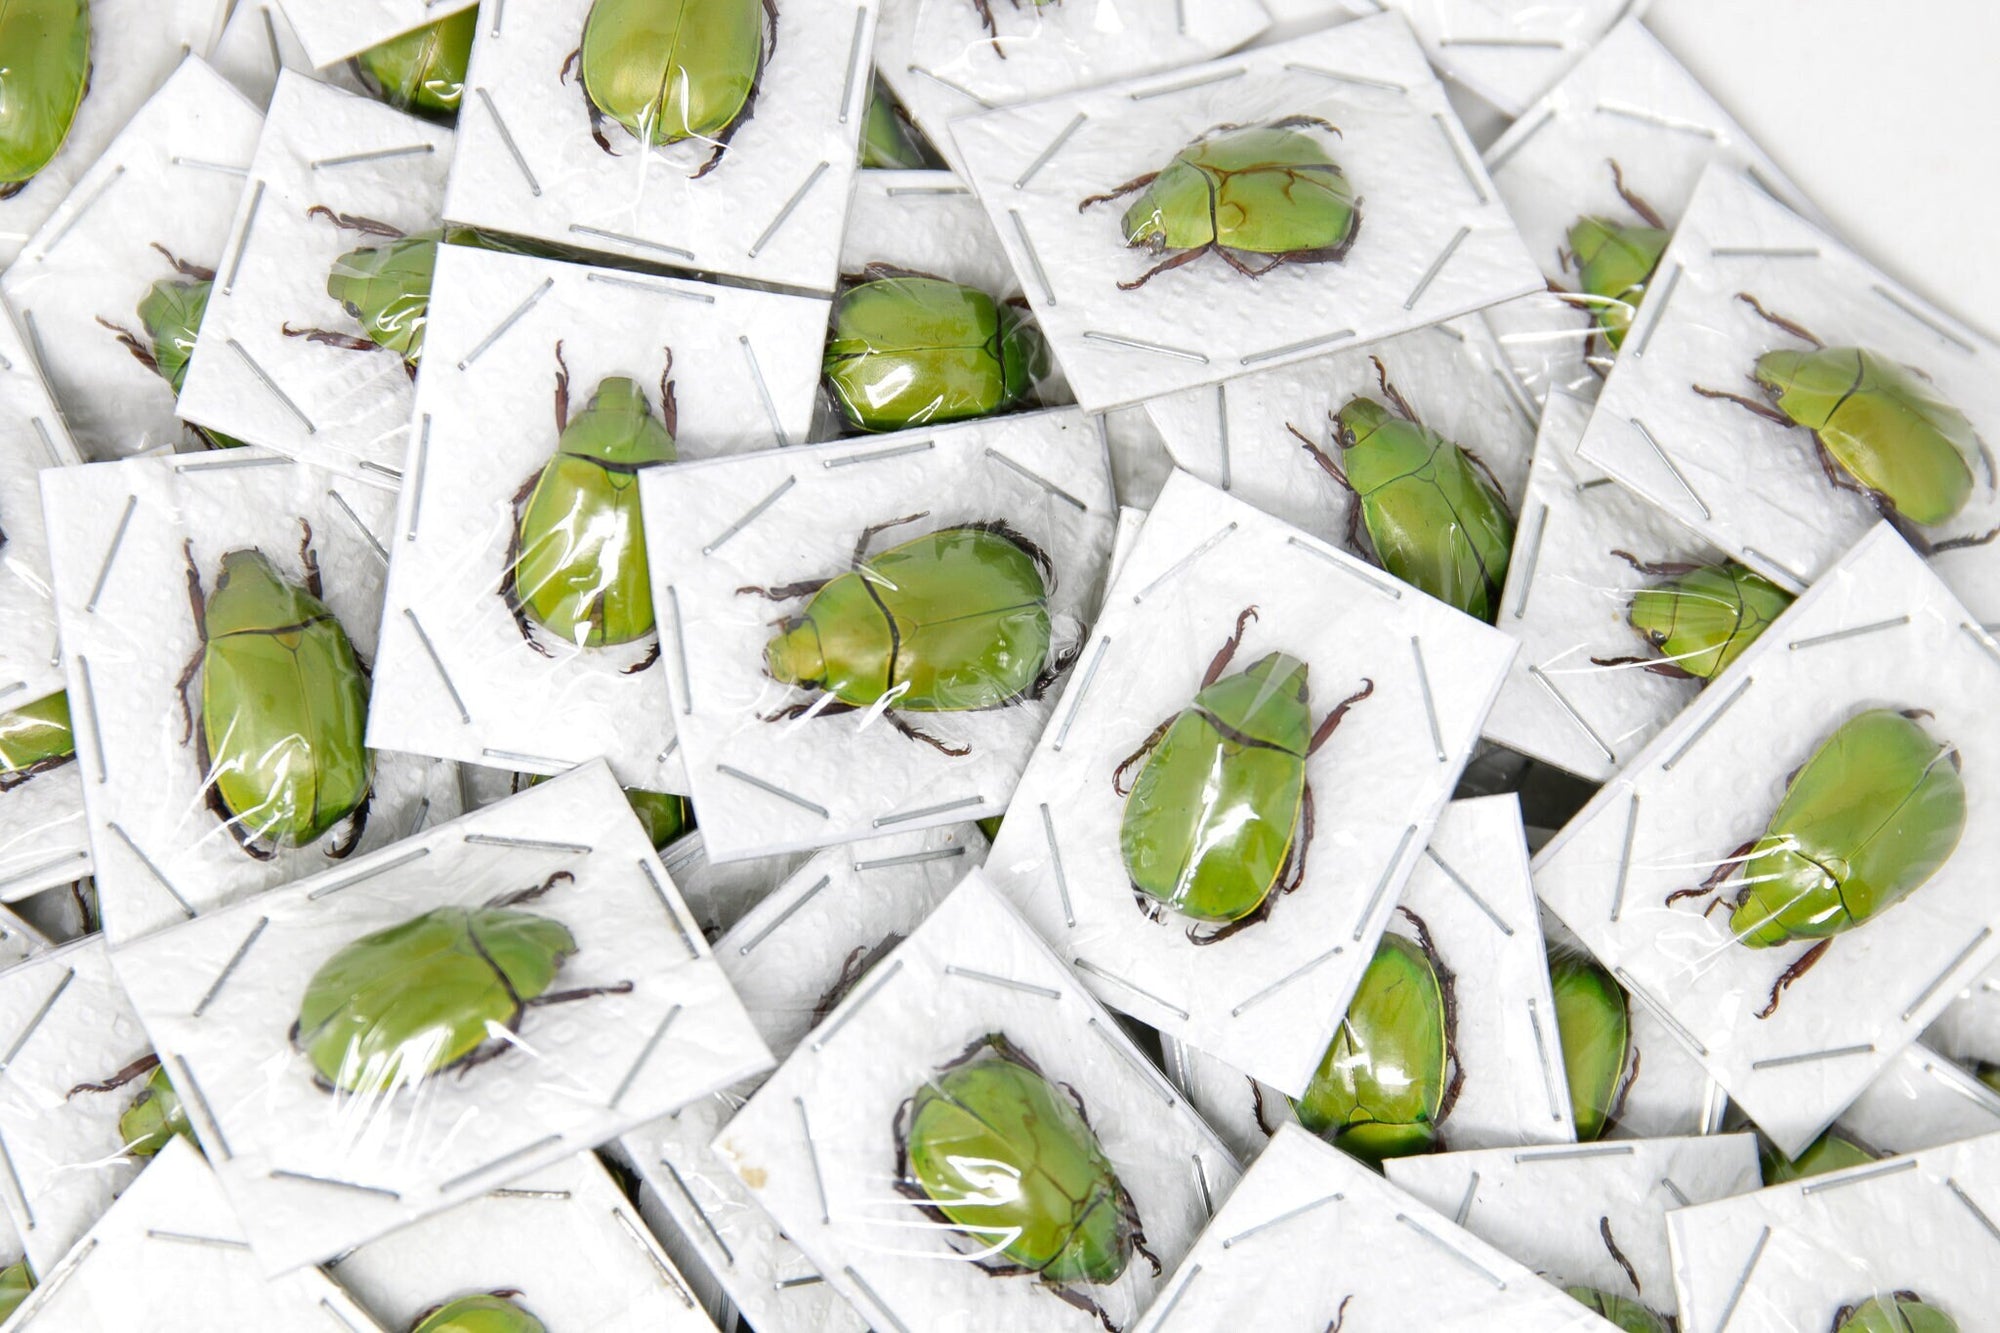 Pack of 10 Apple Green Scarab Beetles (Anomala dimidiata) Insect Specimens for Collecting